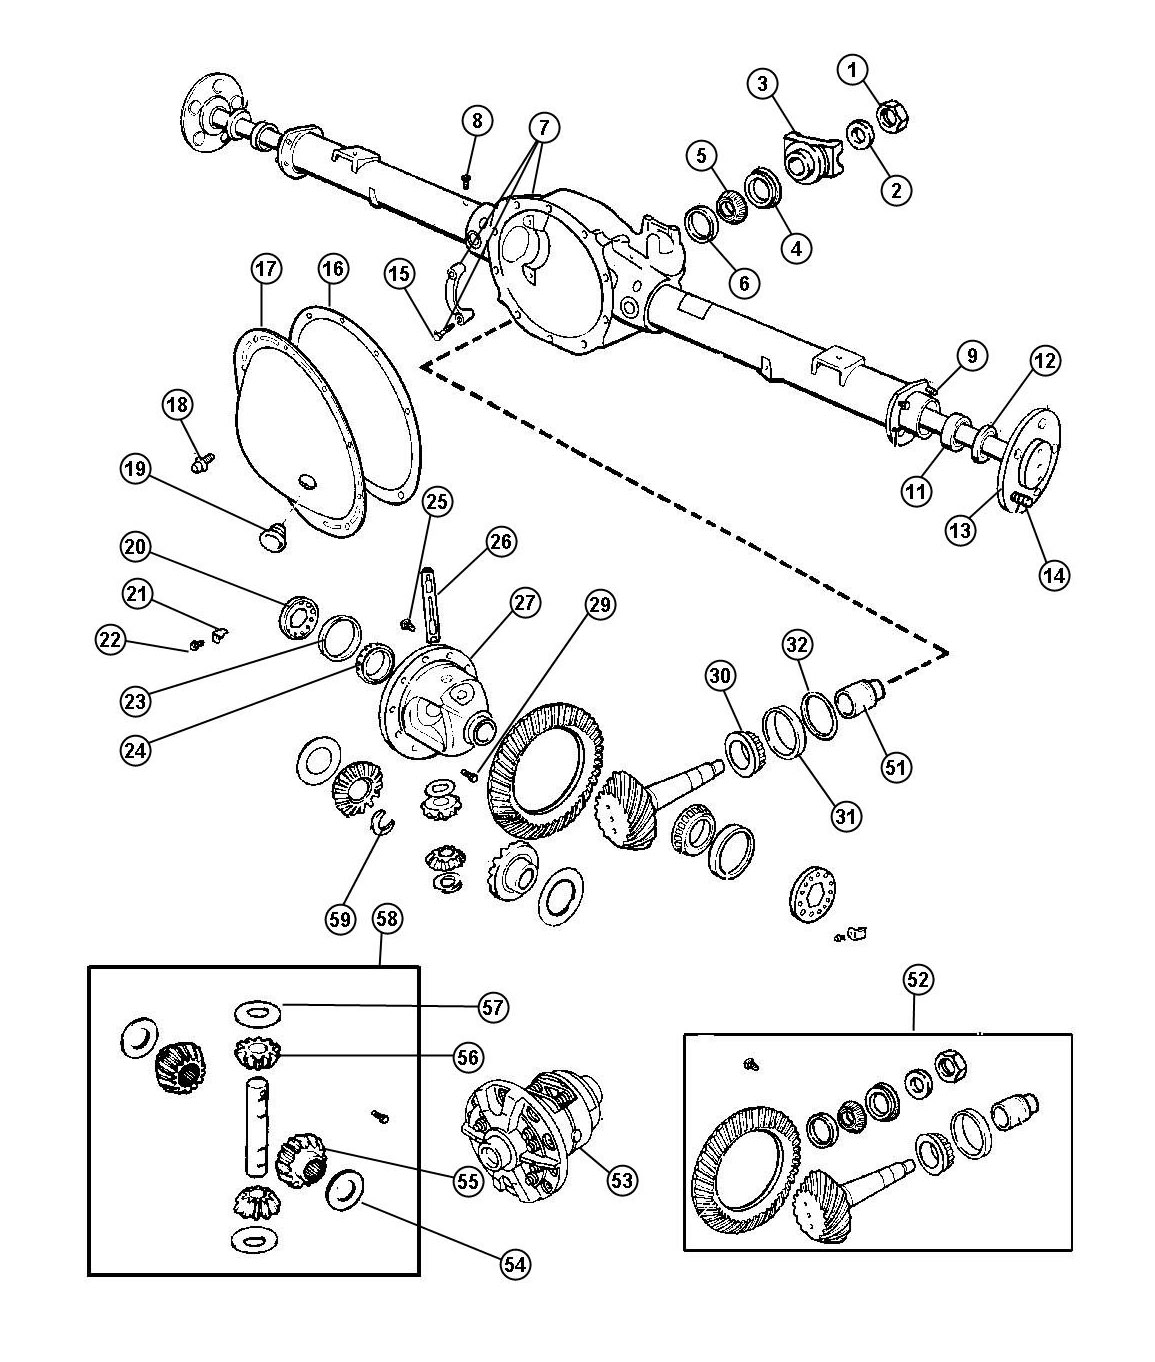 Chrysler 8.25 Rear Axle - Exploded View of XJ